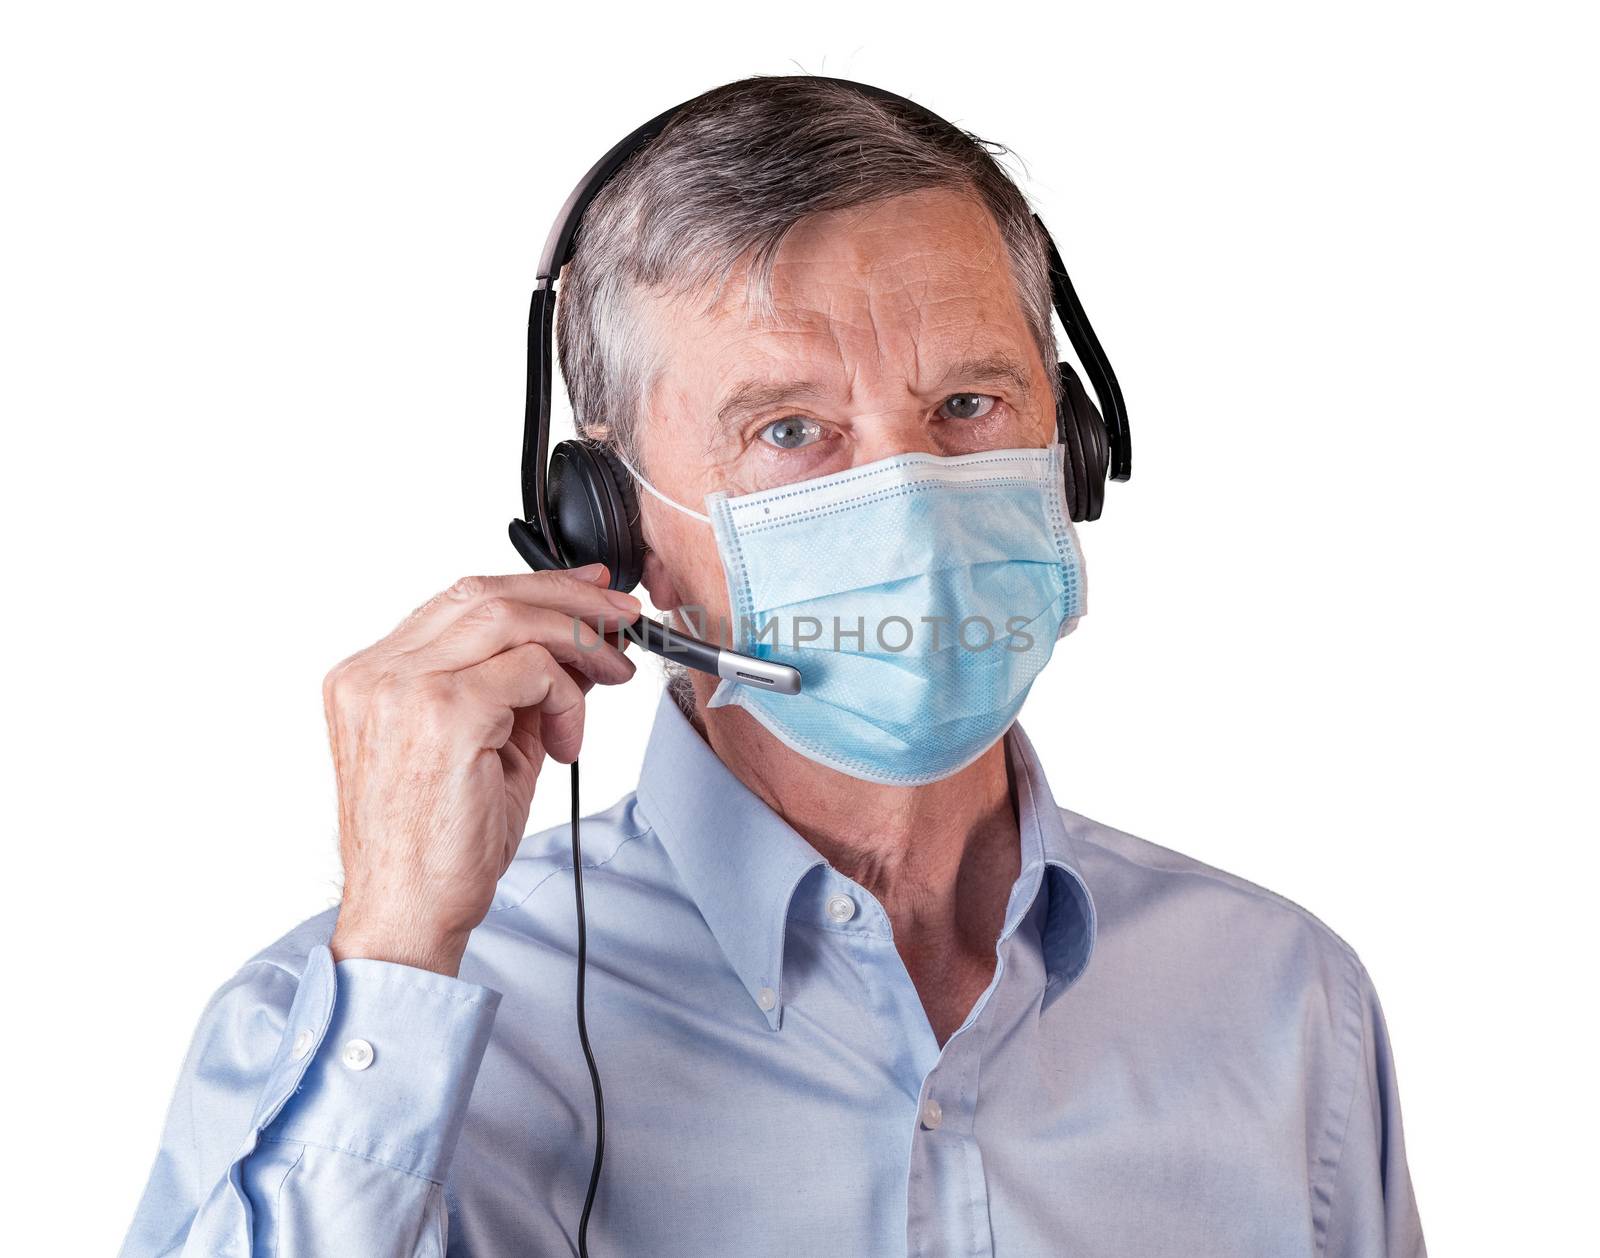 Senior man with face mask using headset to communicate with team or customers by steheap